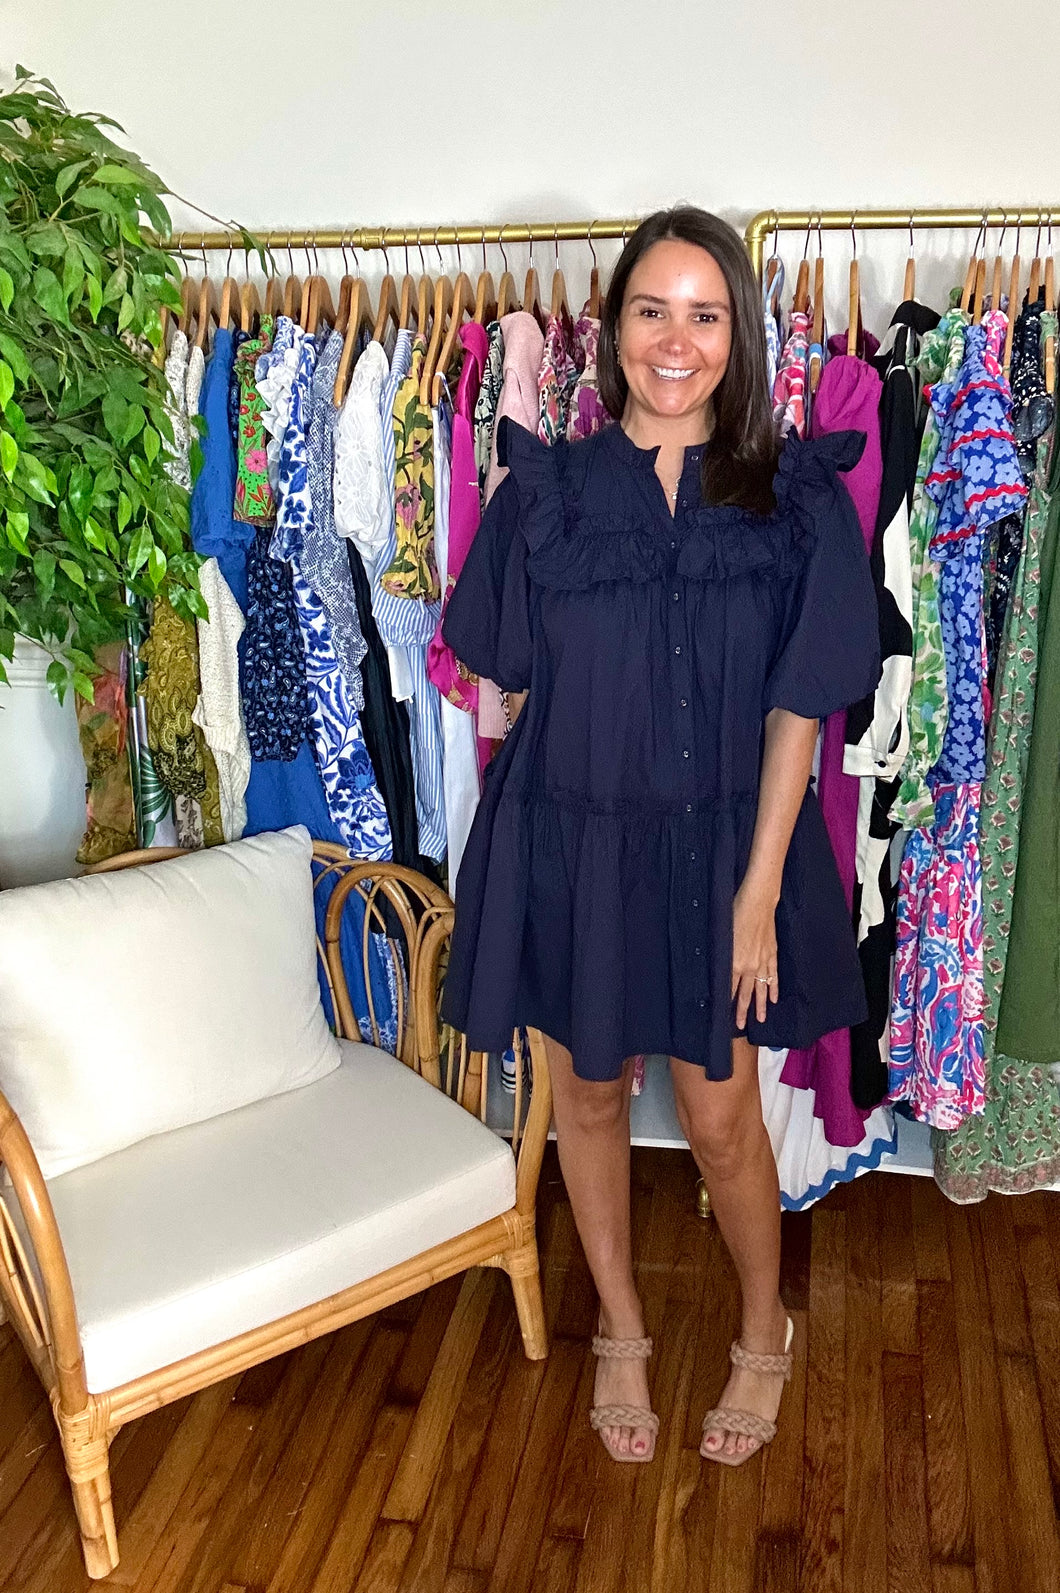 Tatiana Mini Dress - Dark navy blue cotton poplin mini shirt dress with drop waistline and pockets in skirt. Double Ruffle at yoke and shoulders with puff sleeves. Functional front buttons, fabric covered buttons.  True to size, wearing size small.  Good for bump, post bump or no bump!